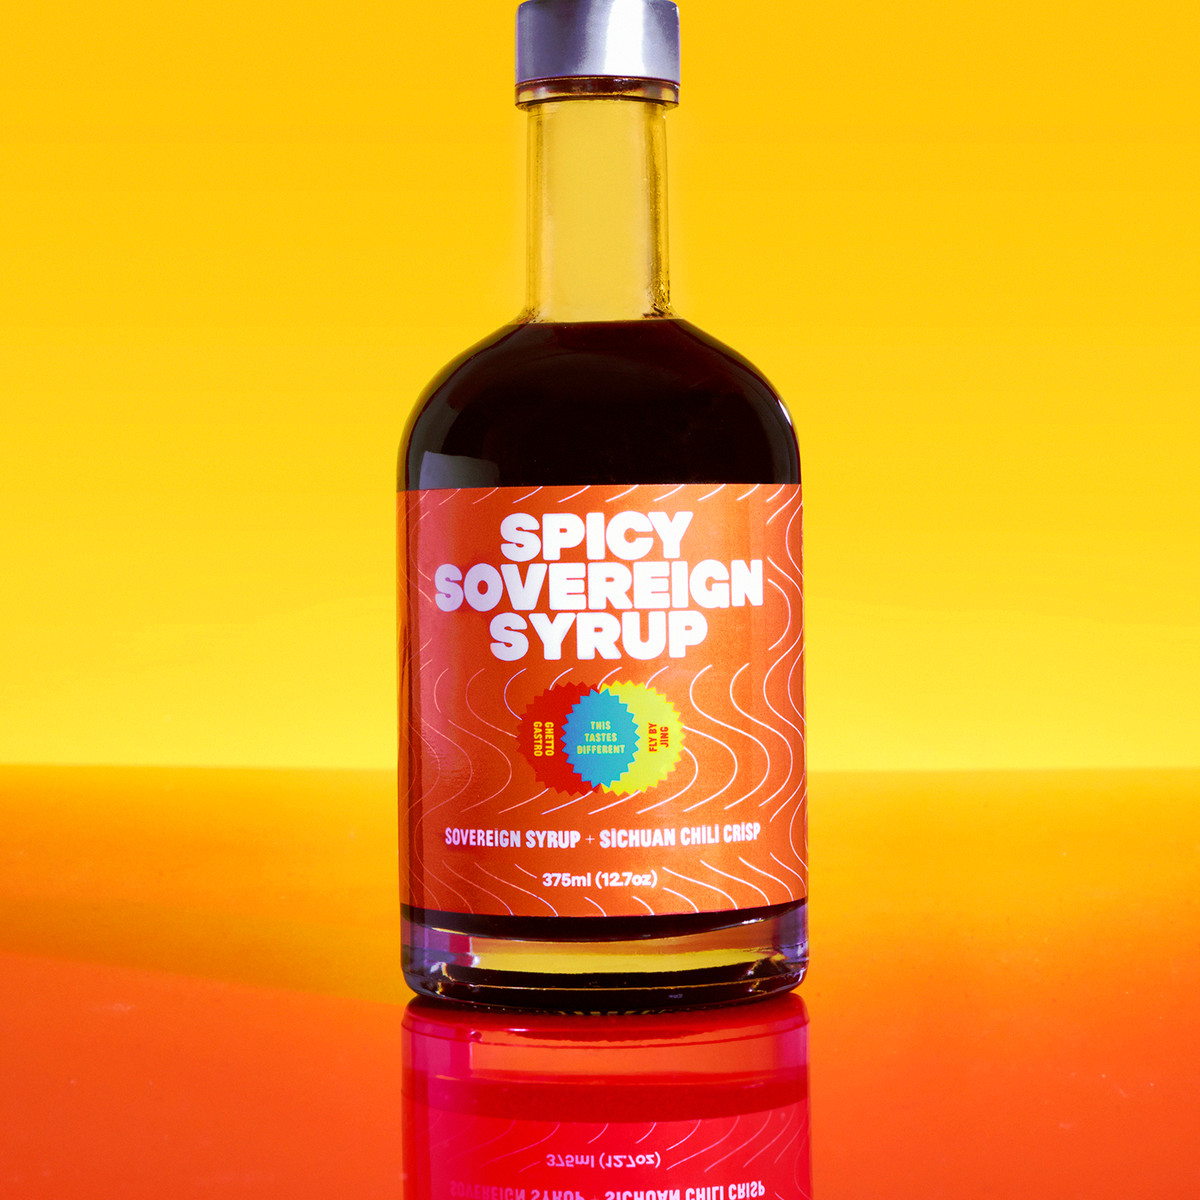 A bottle of spicy sovereign syrup